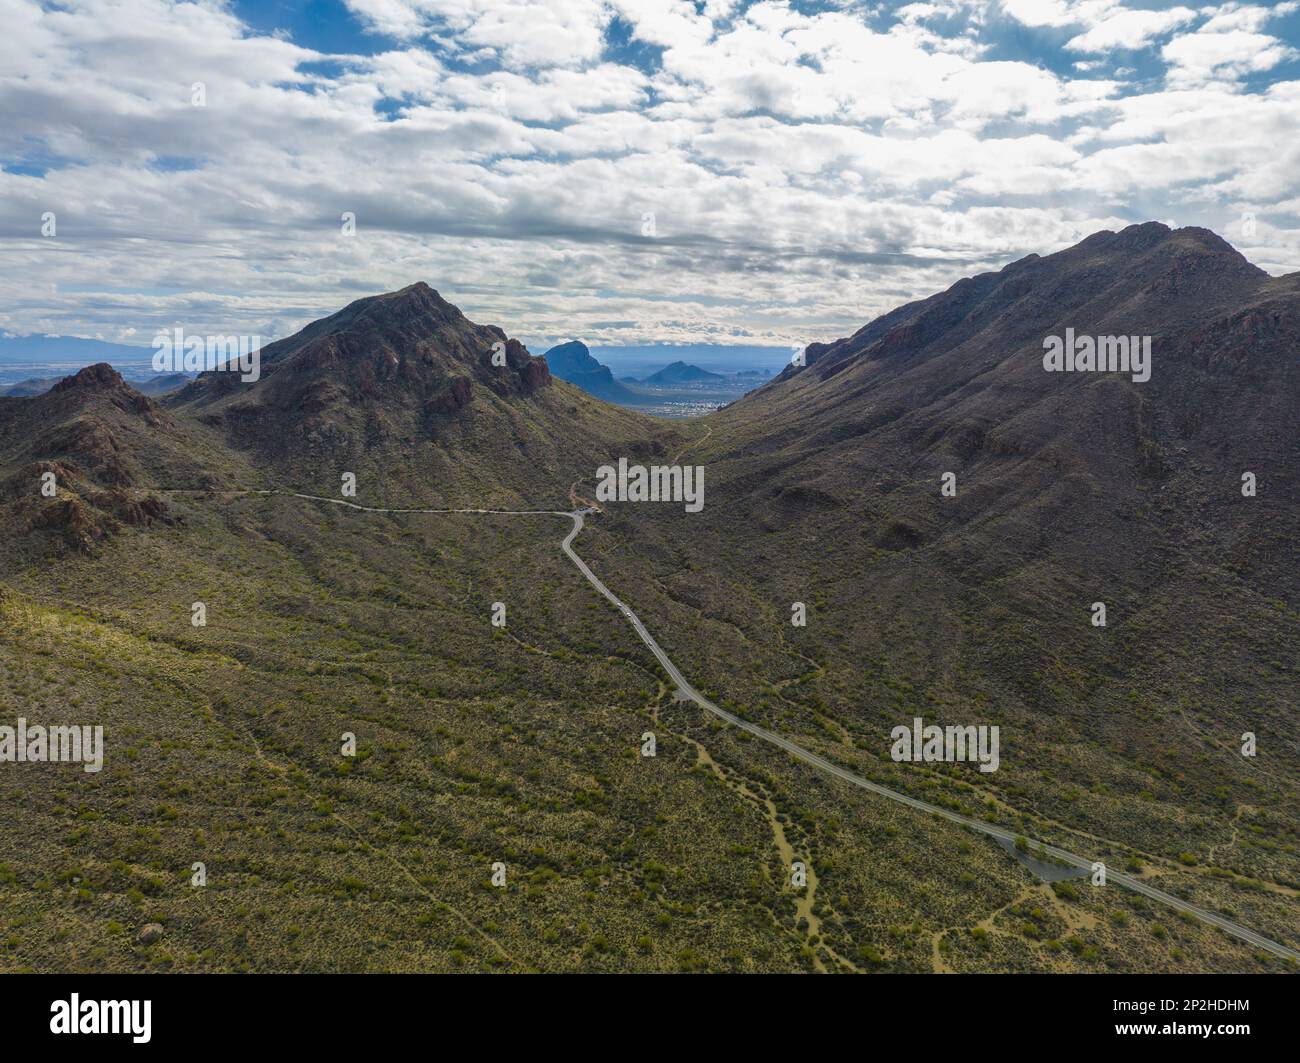 Yetman Trail between Ringtail Ridge and Golden Gate Peak in Tucson Mountains aerial view with Sonoran Desert landscape from Gates Pass near Saguaro Na Stock Photo